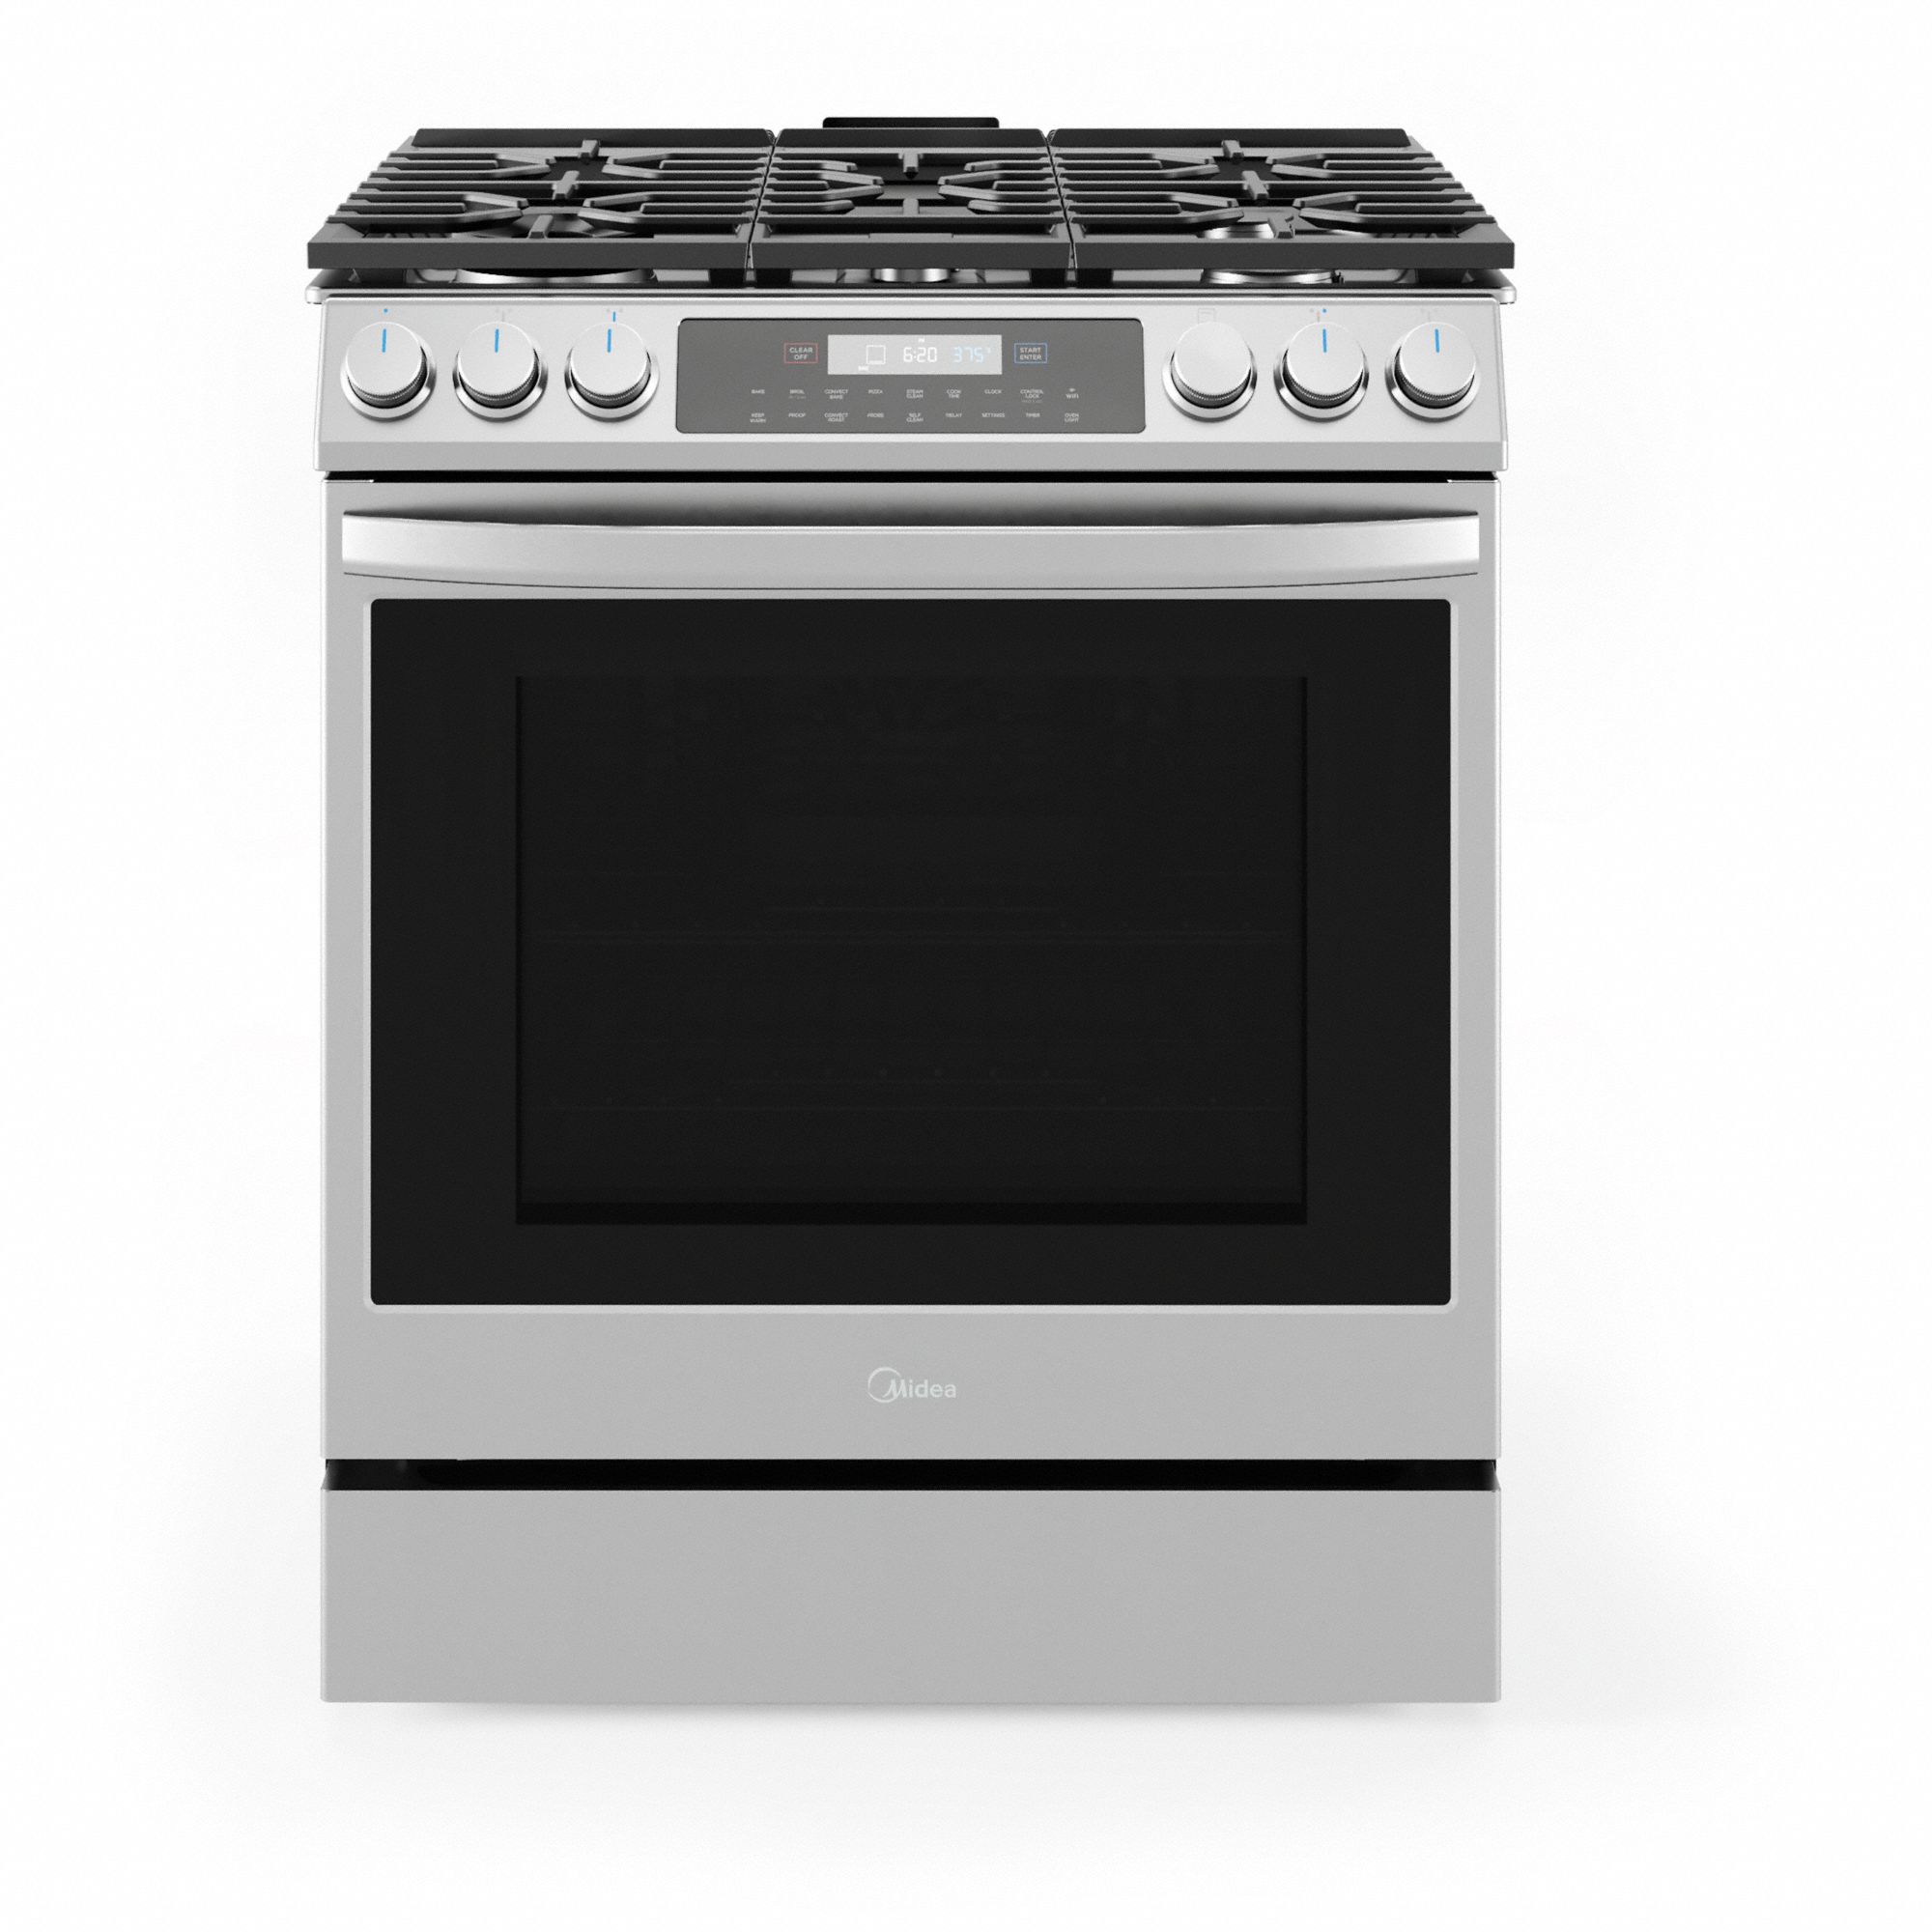 Range: Stainless Steel, Natural Gas, 5 Burners, ADA Compliant, Self Cleaning